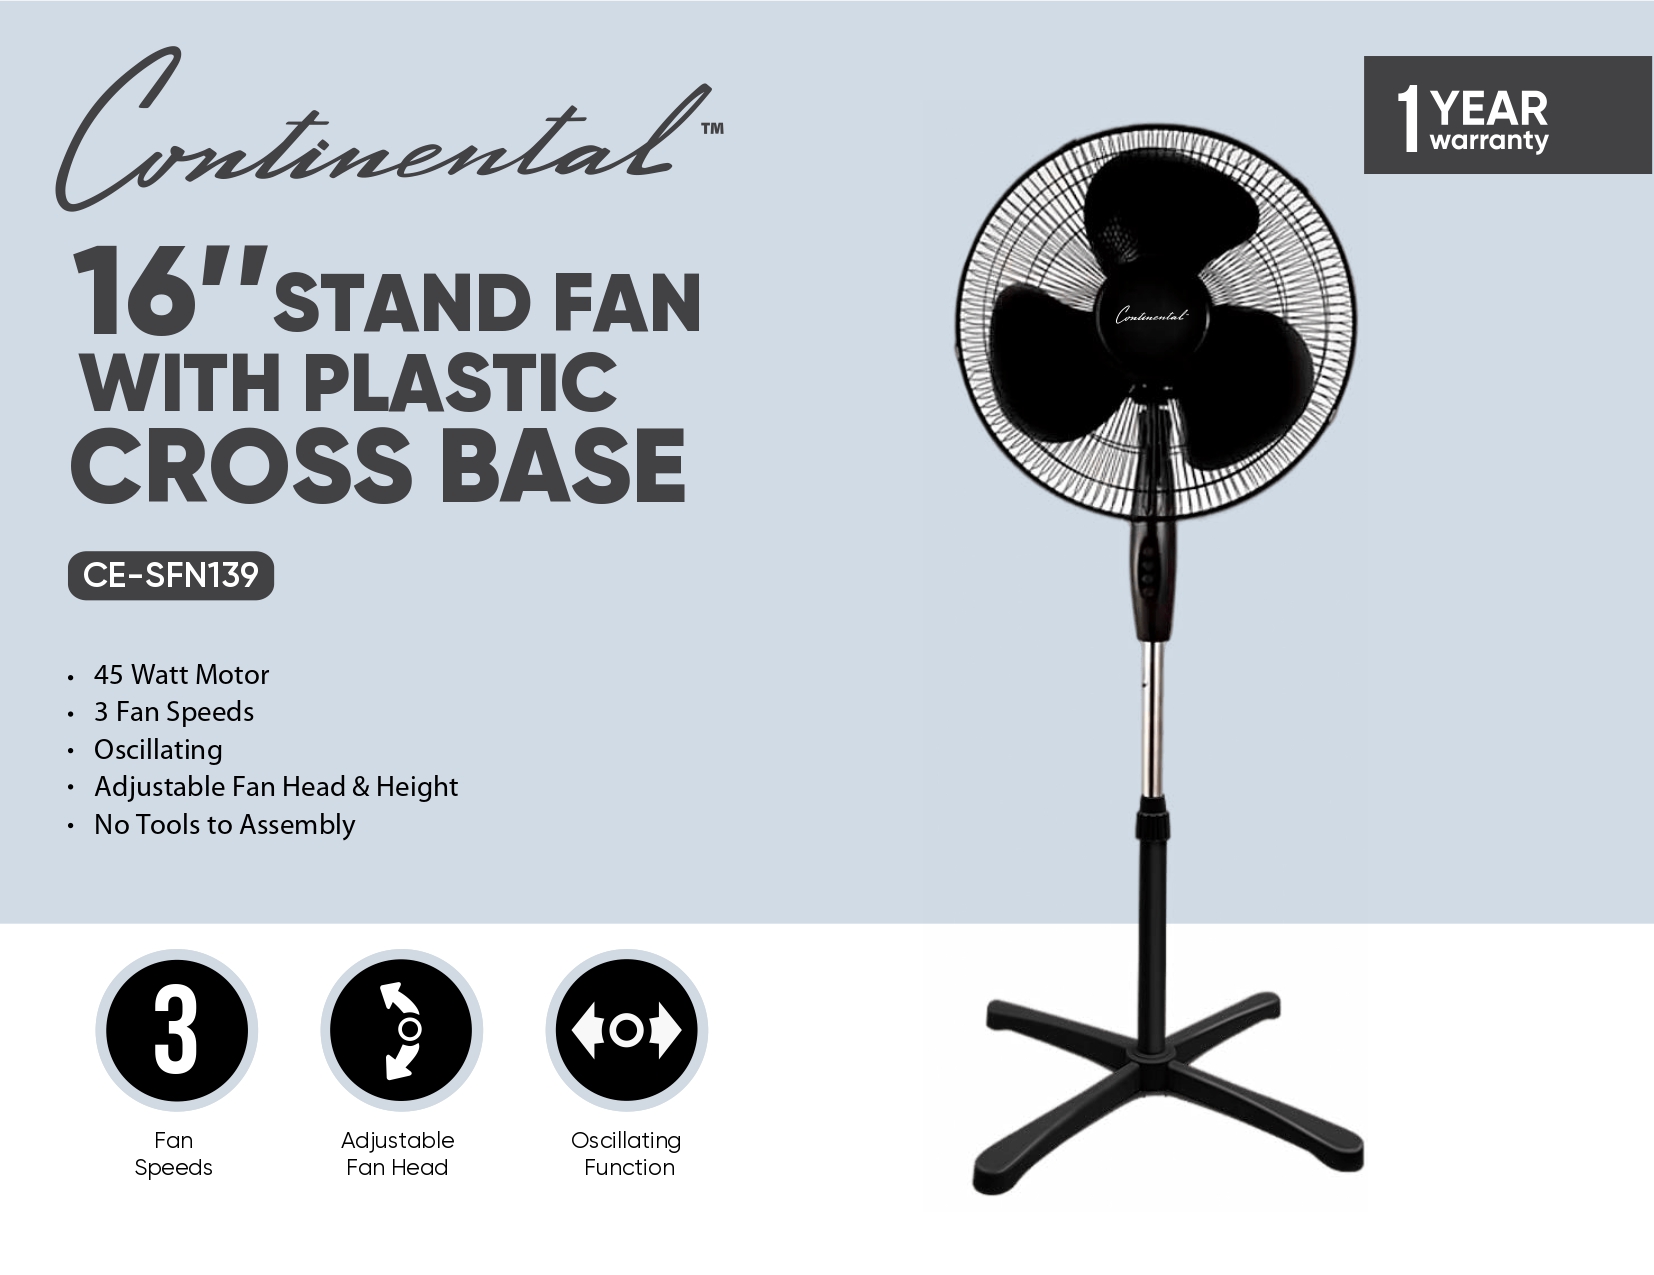 16’’STAND FAN WITH PLASTIC CROSS BASE